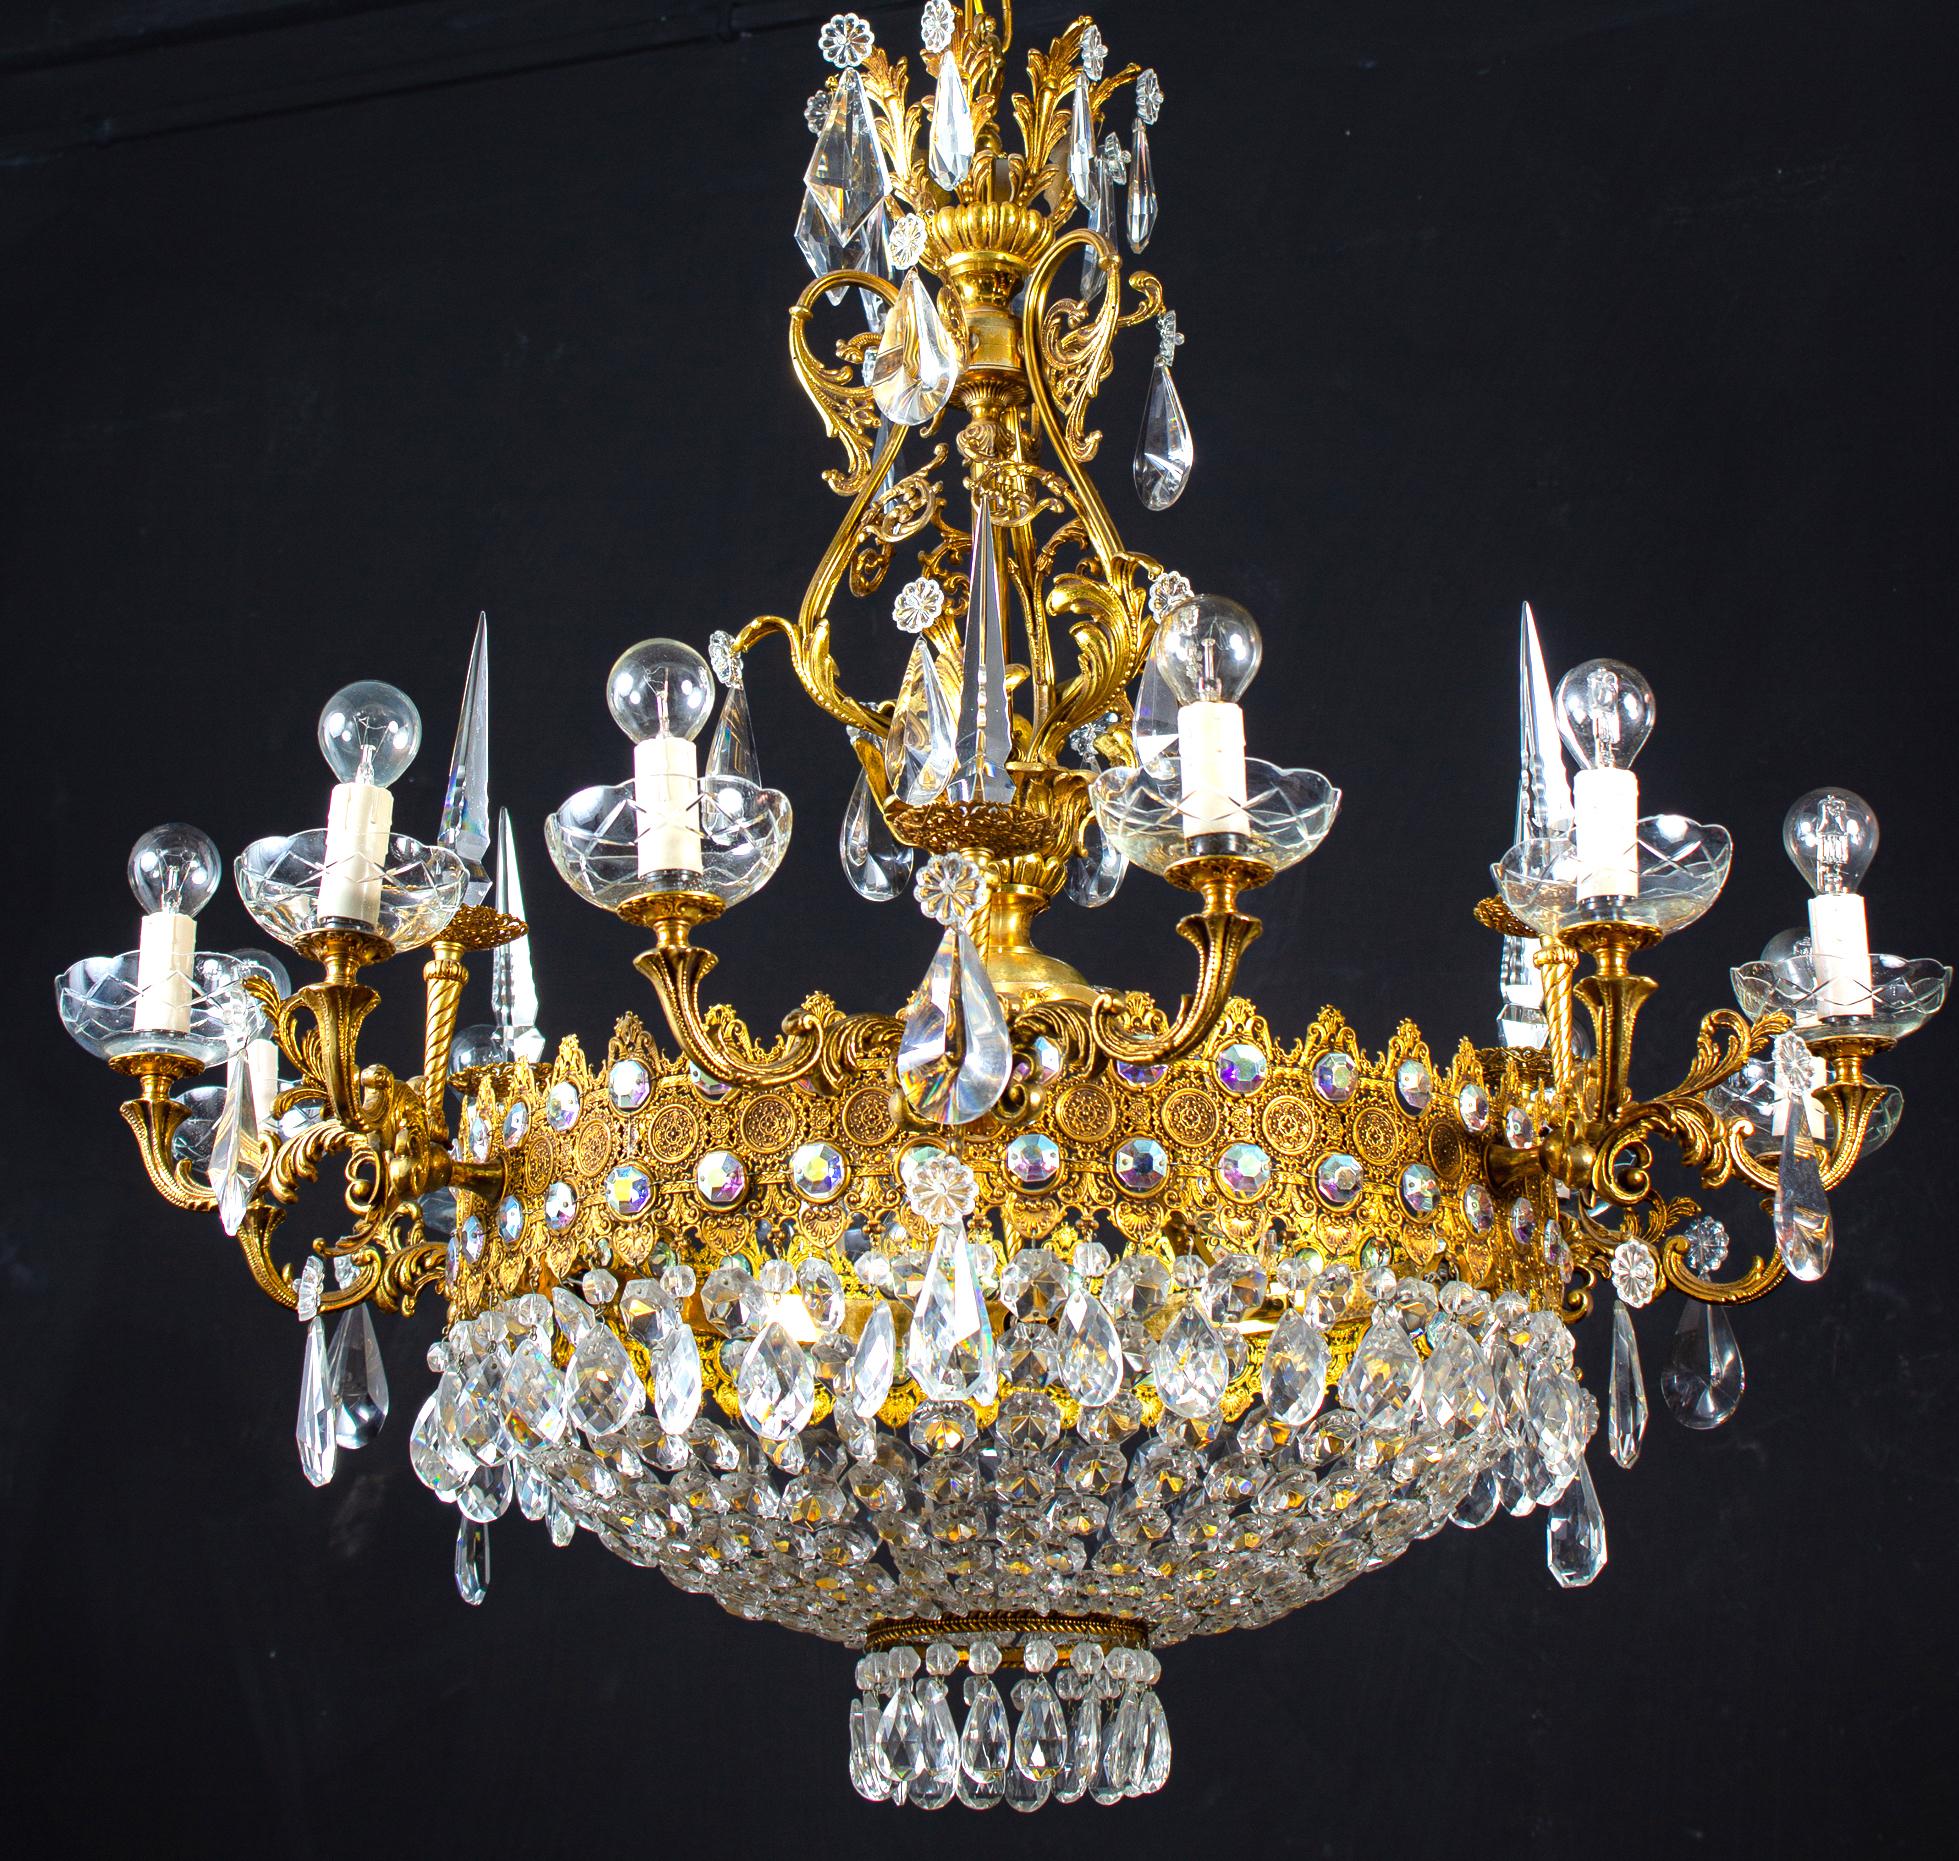 This Sumptuous twelve arms chandelier with a set of precious diamond shape cut crystal and drops on a finely chiseled gilt bronze support, decorated with Acanthus leaves. Matching bronze gilded chain and a ceiling canopy.
Ideal for a large reception